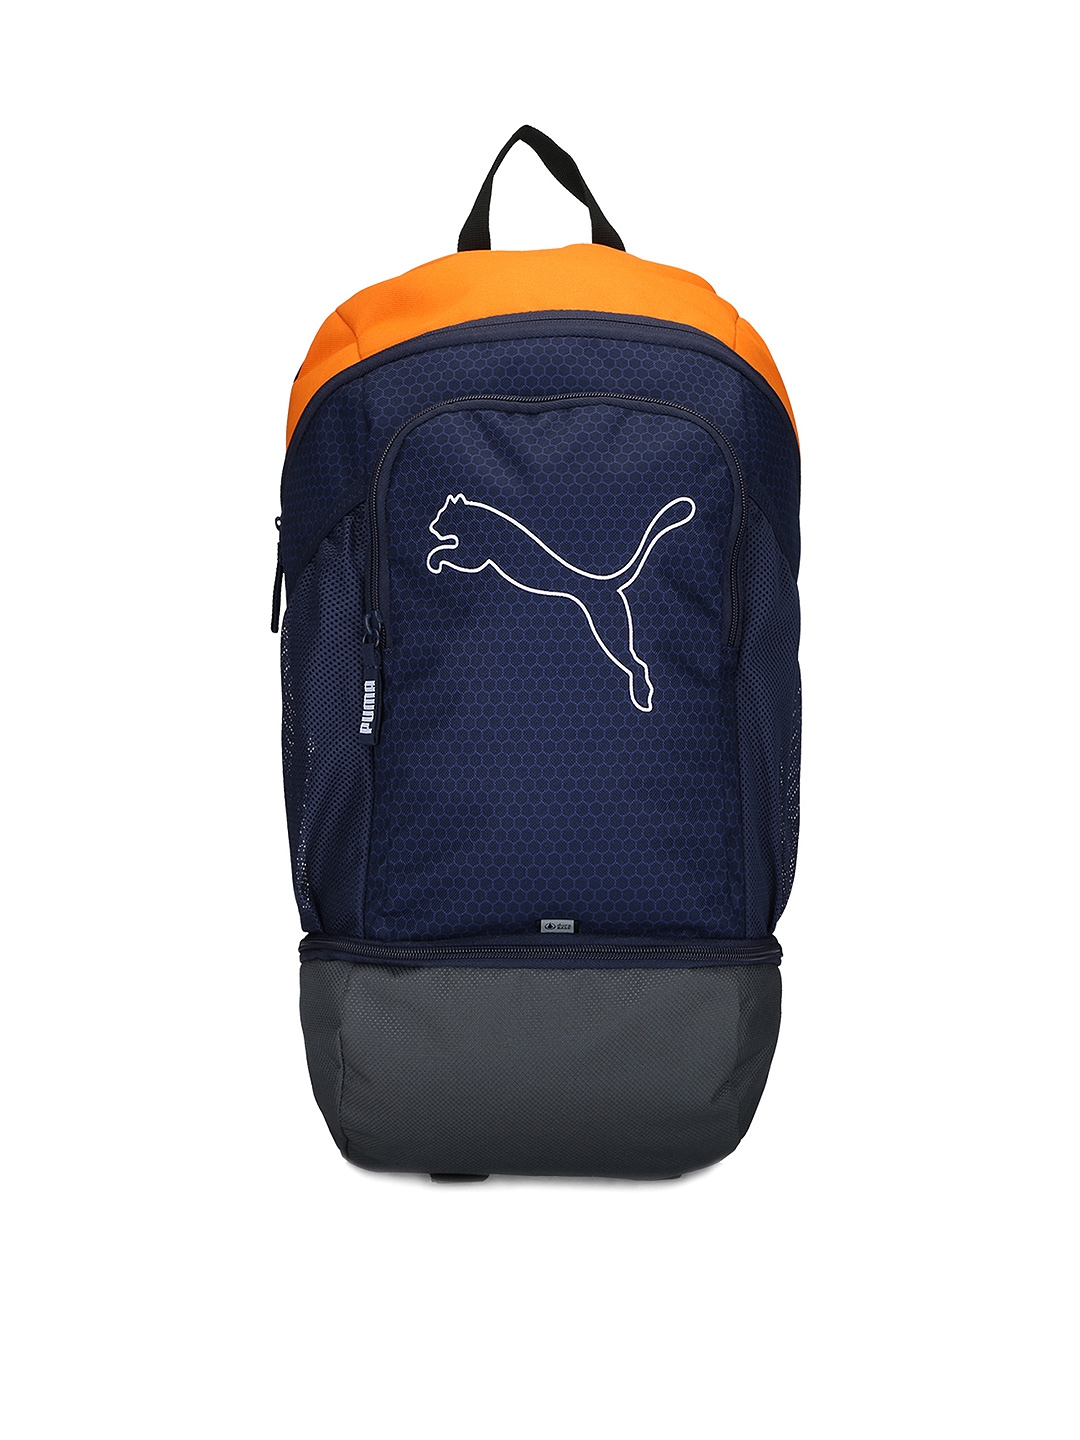 puma echo backpack review